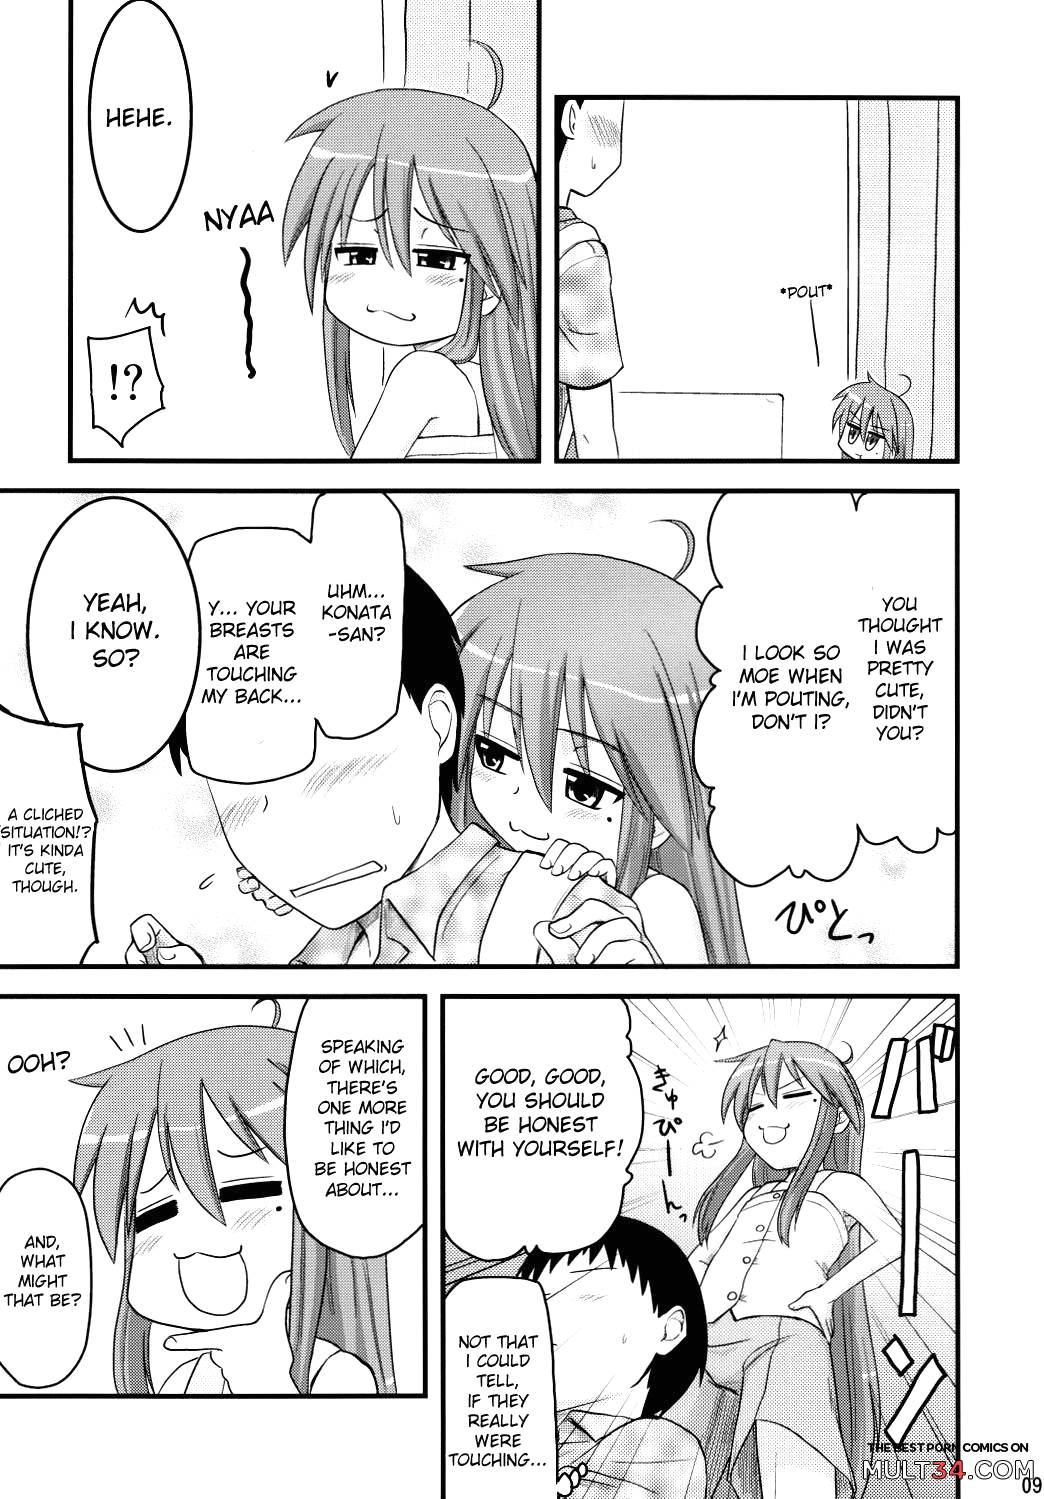 Konata and Oh-zu 4 people each and every one + 1 page 5